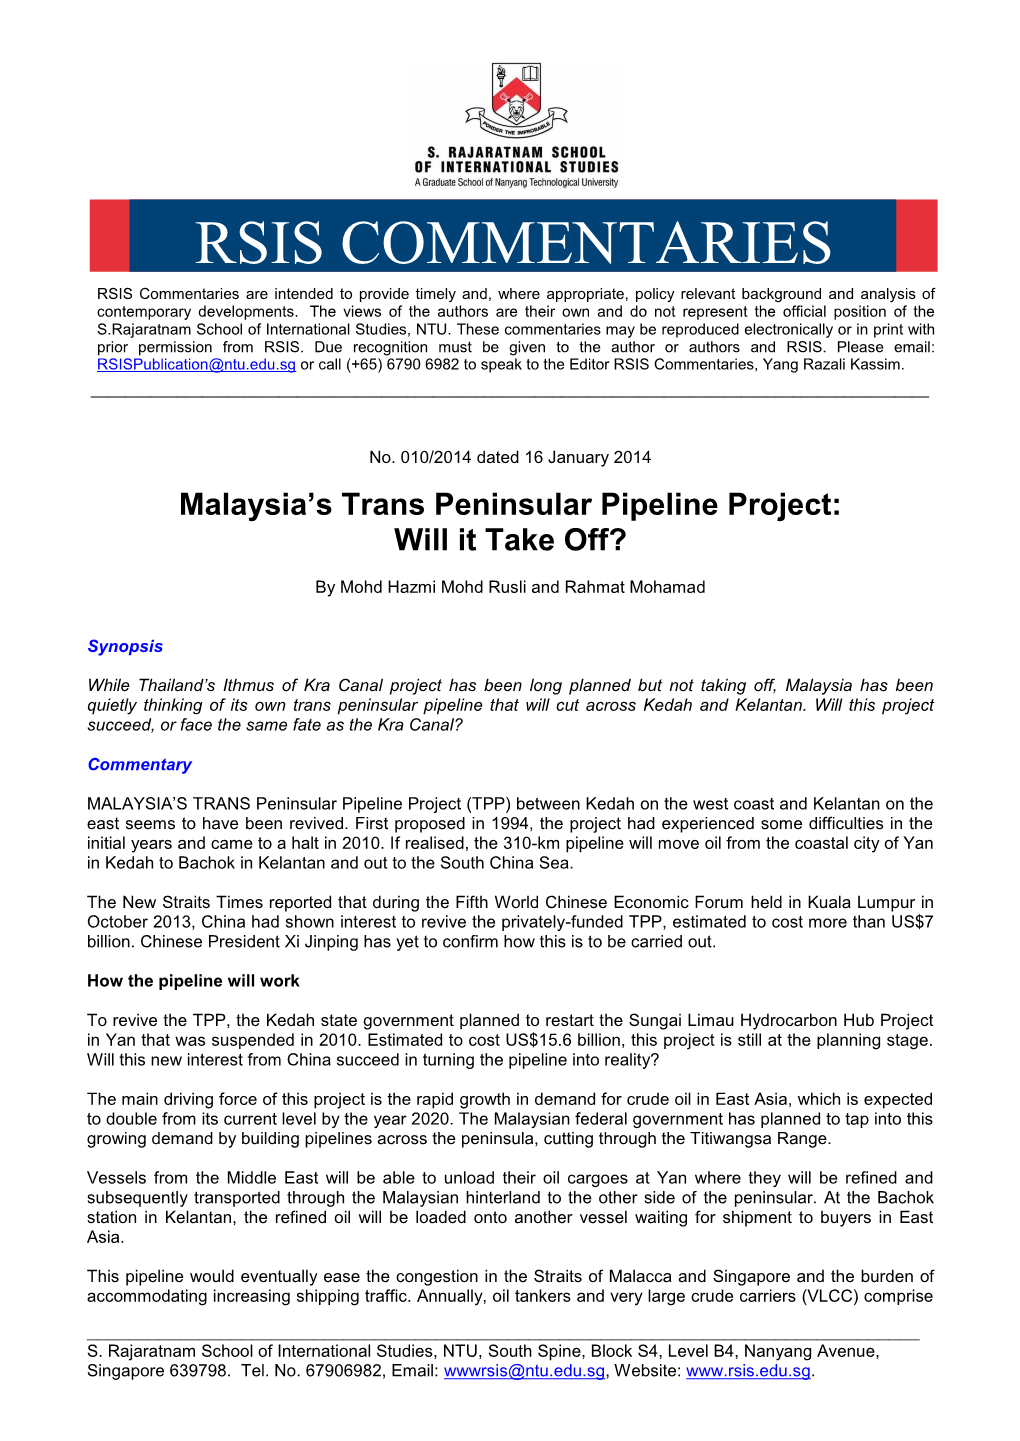 Malaysia's Trans Peninsular Pipeline Project: Will It Take Off?